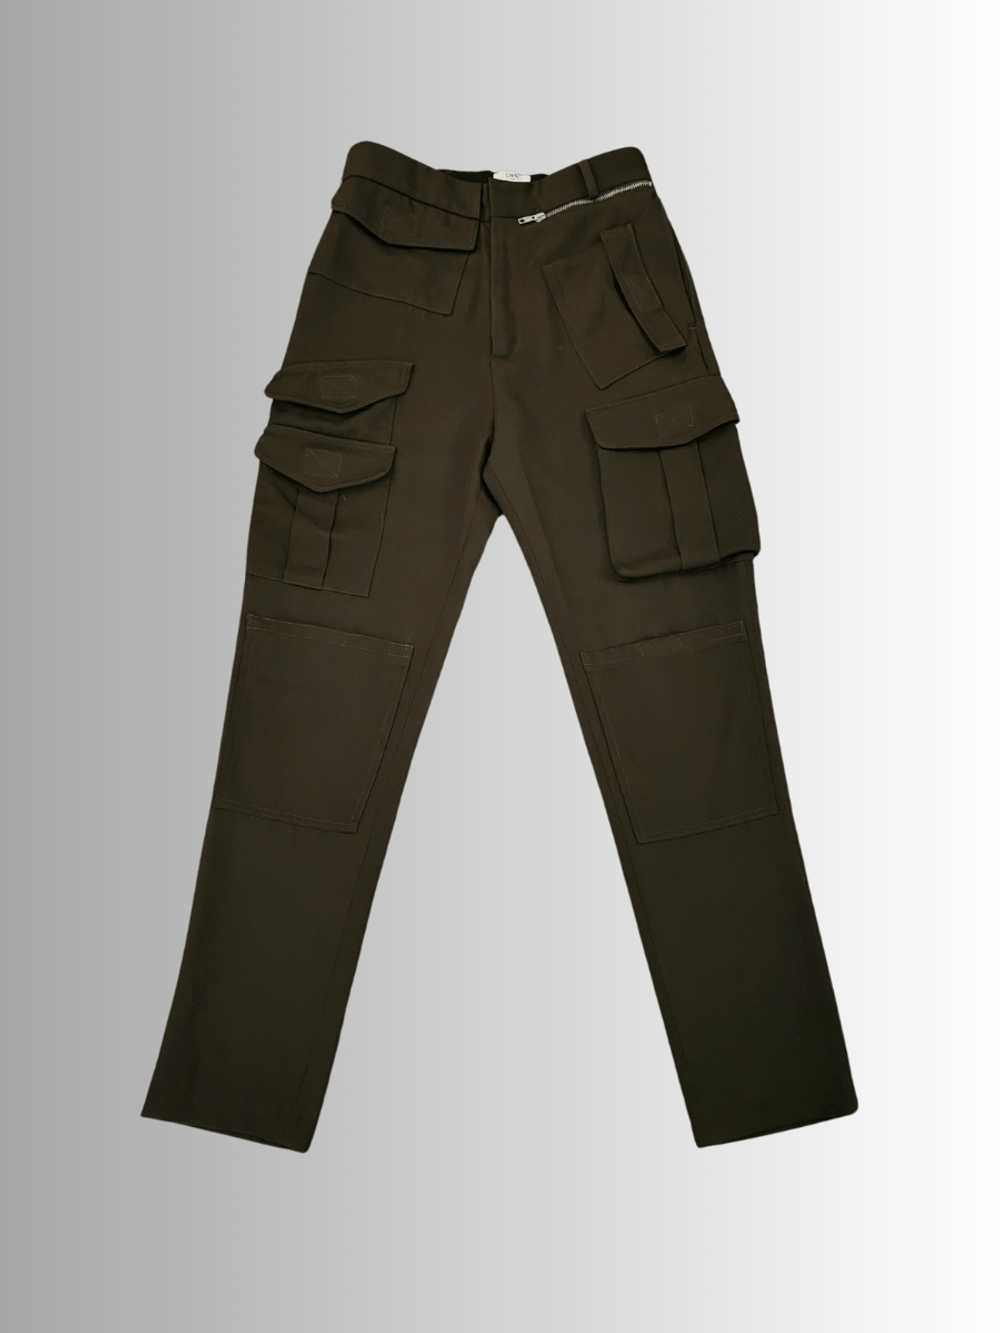 Cmmn Swdn × Designer Collection × Military CMMN S… - image 1